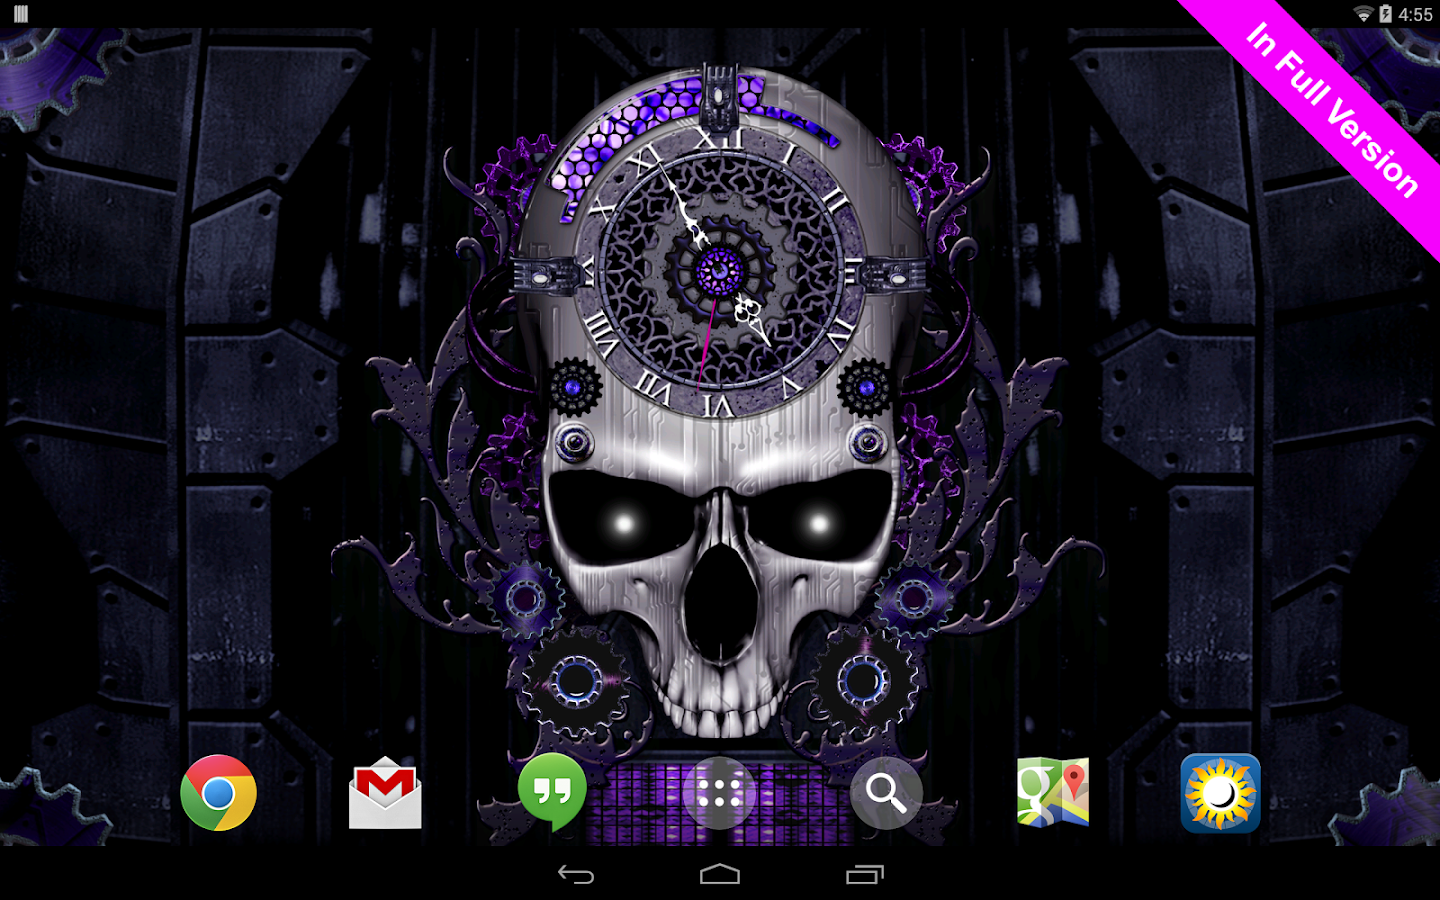 Steampunk Clock Free Wallpaper Android Apps On Google Play